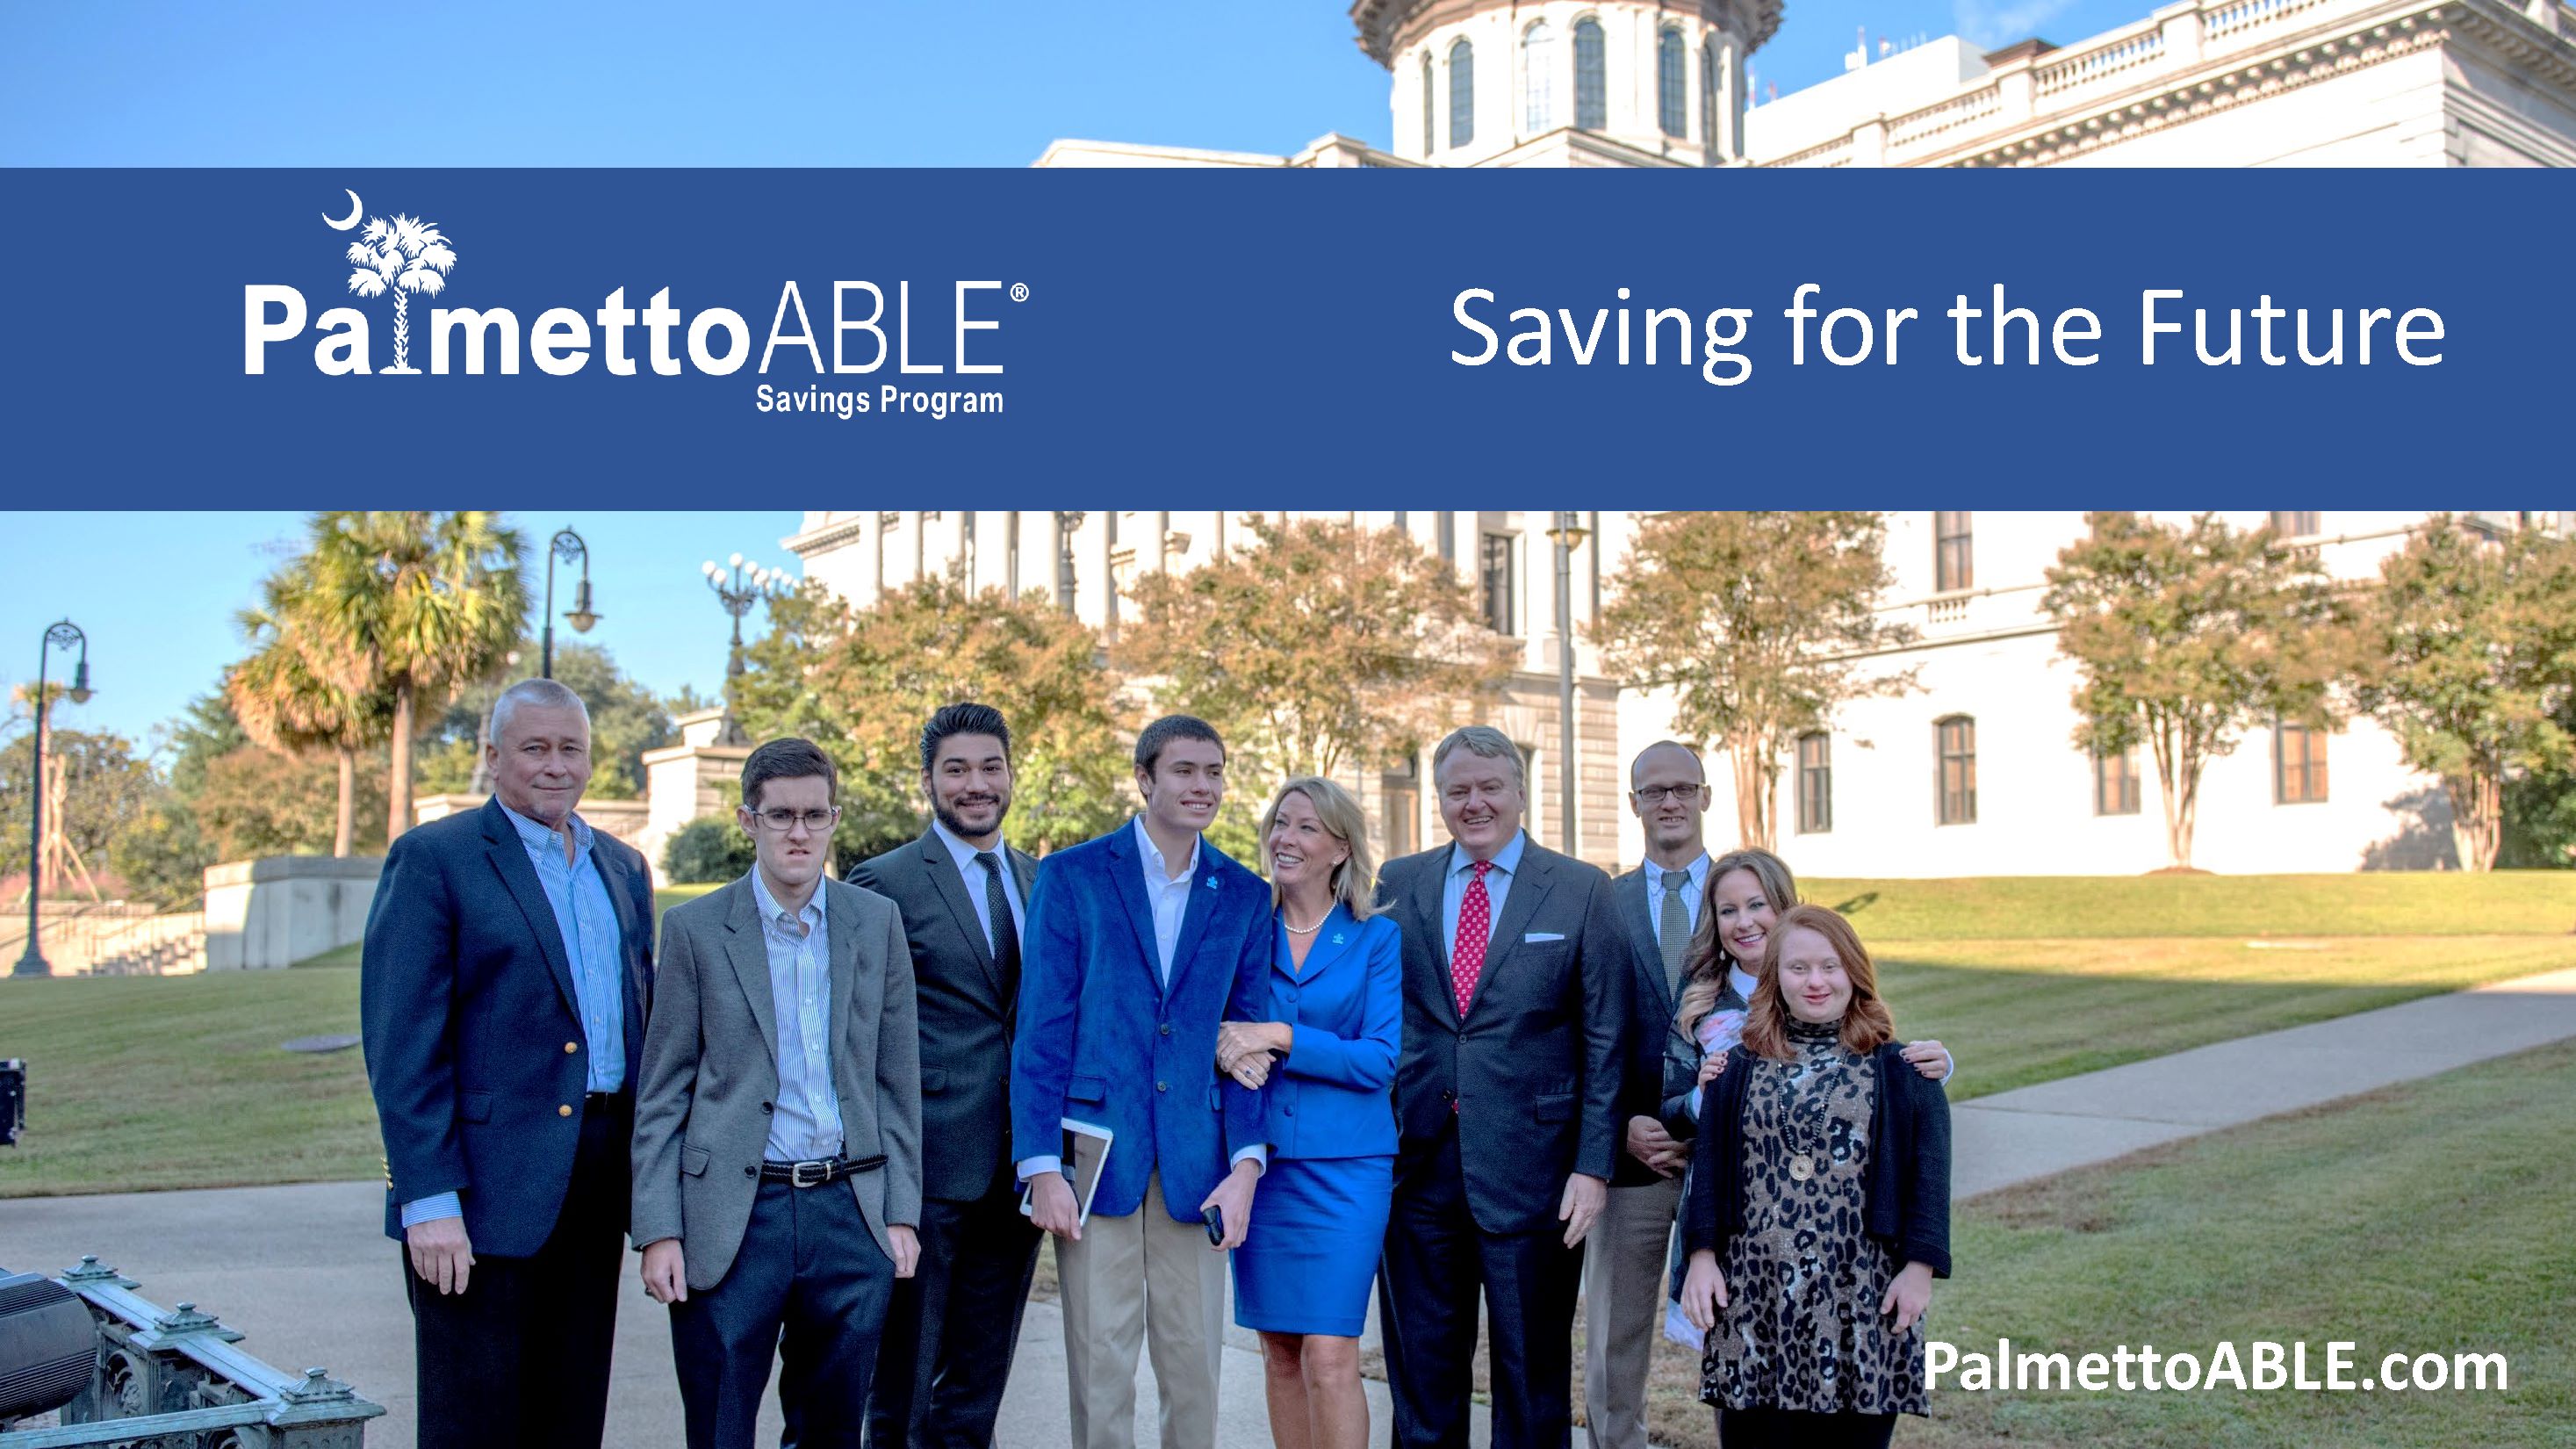 Image of the first slide in the Palmetto ABLE Savings Program presentation. Shows a group of people in front of the state house including Treasurer Loftis. A blue banner over the photo says Saving for the Future, with the Palmetto ABLE Savings Program logo. In the bottom right corner it says PalmettoABLE.com